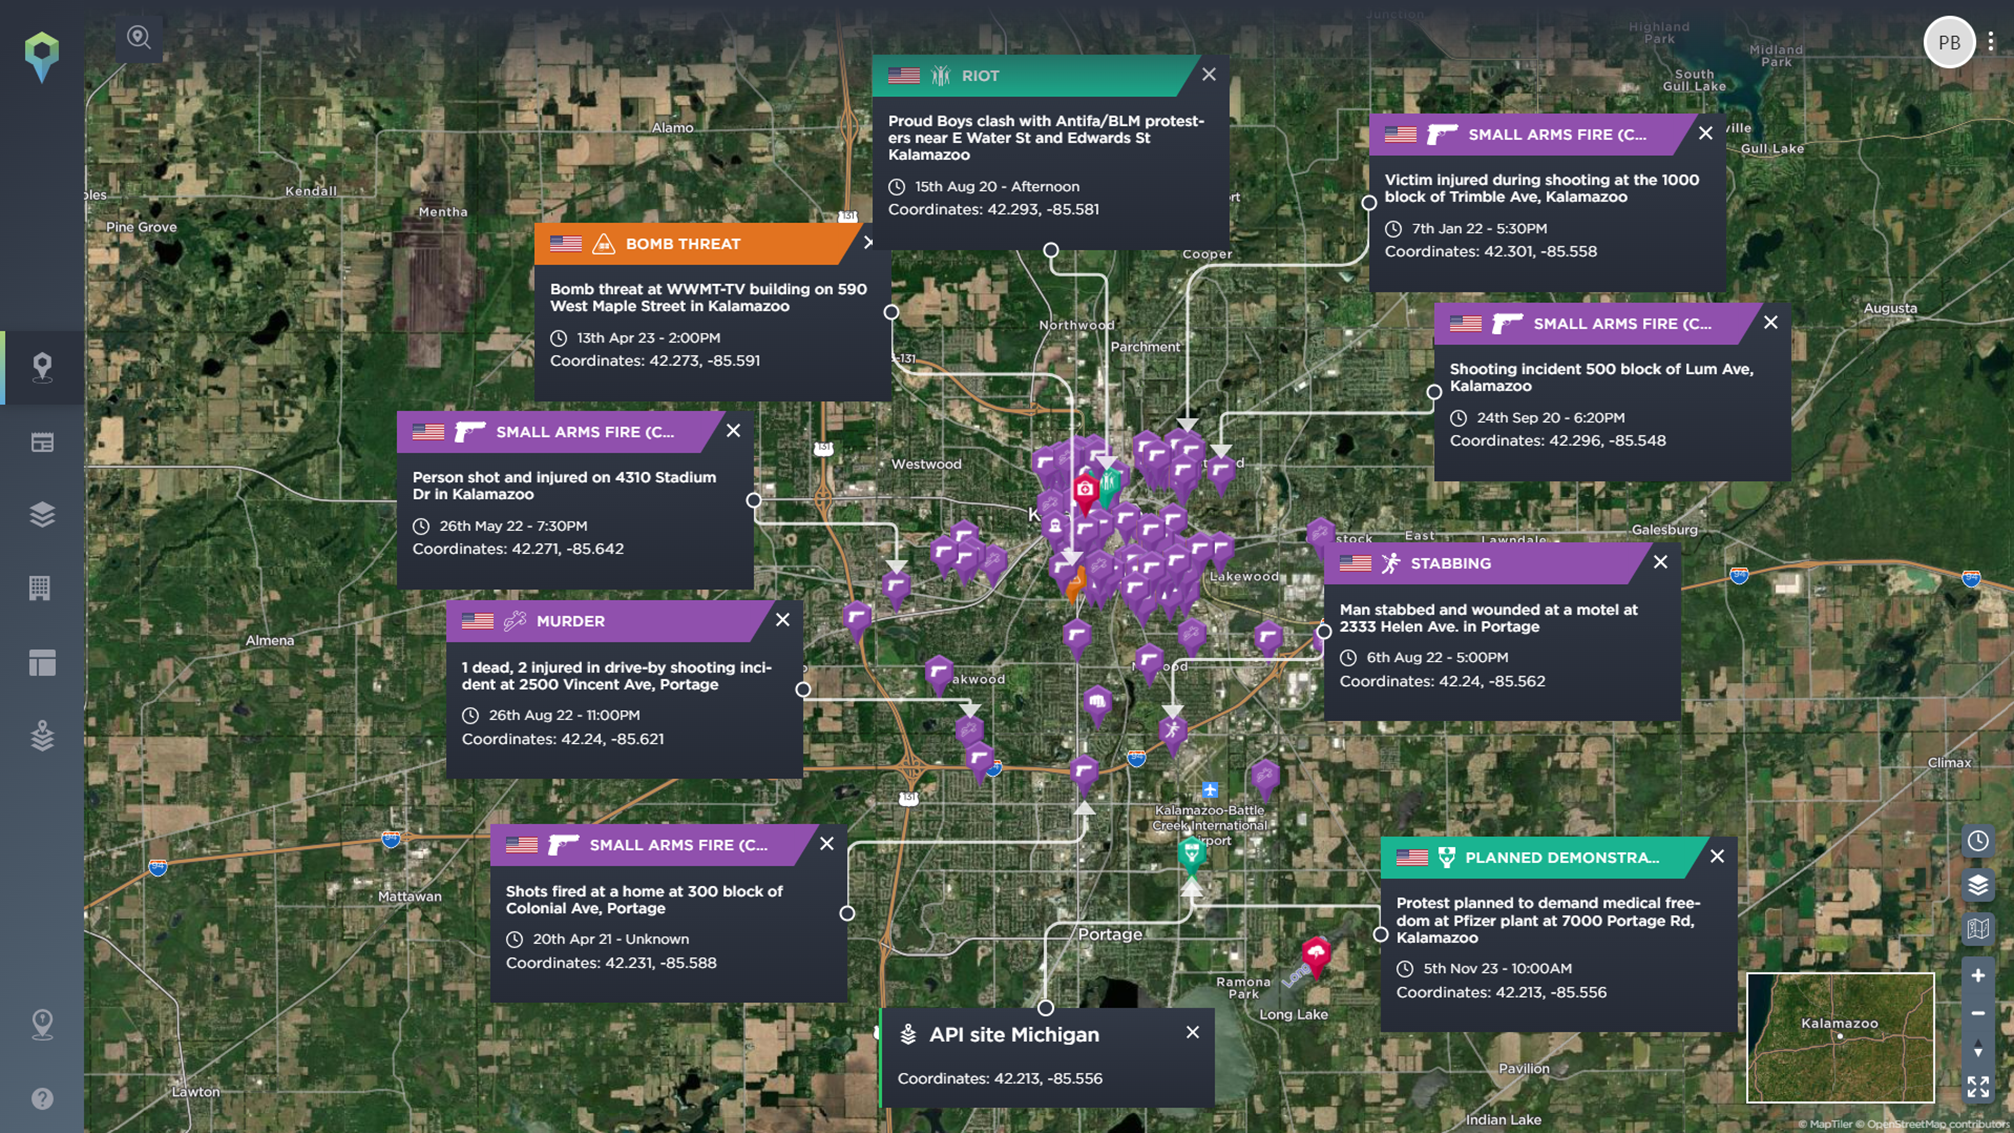 Incidents within 10km of an API manufacturing site in Michigan, identified using the Intelligence Fusion platform